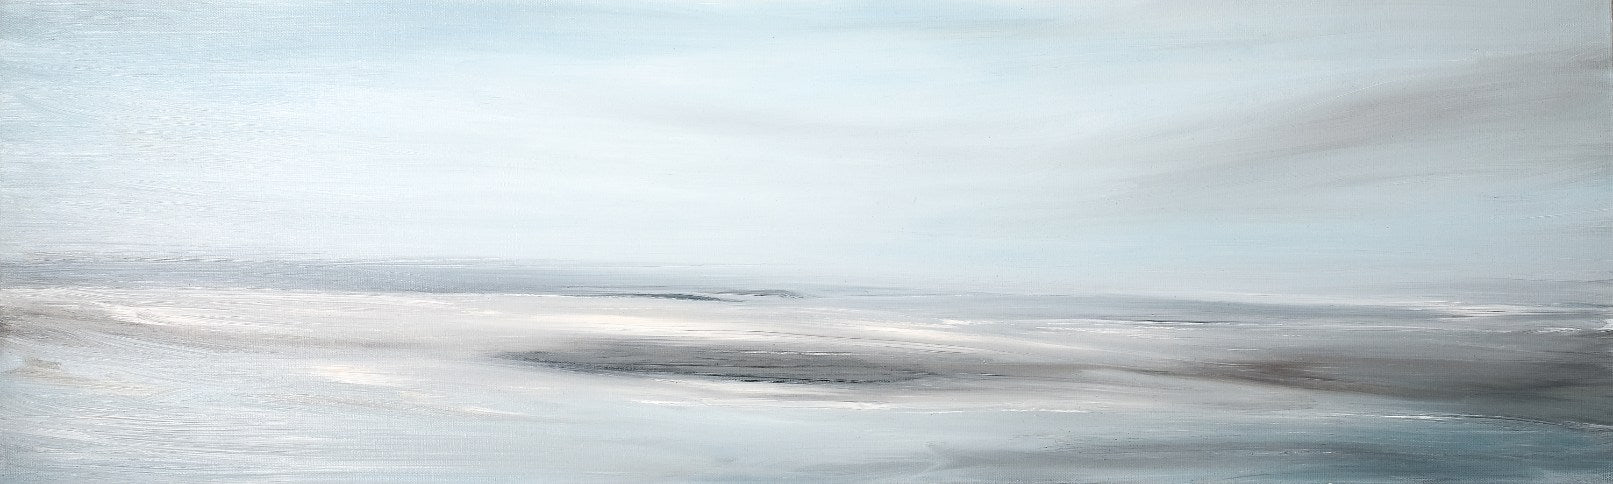 Horizontal seascape image in light greys and pale blues of a Scottish Hebridean sea.